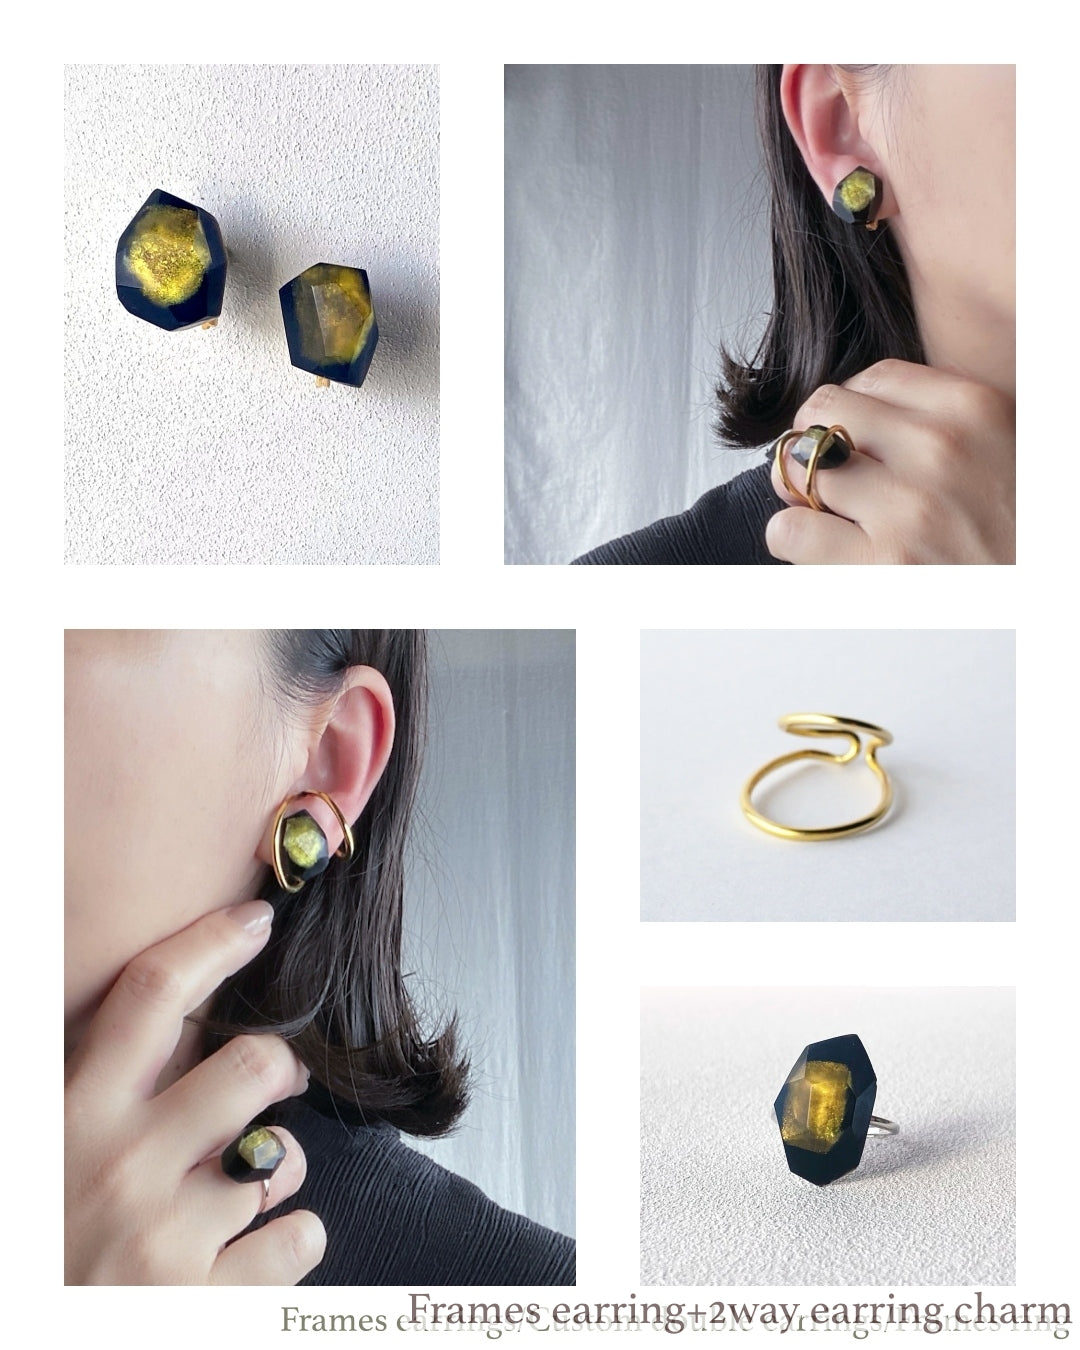 Orbit double line ring, ear cuff / Interchangeable /着せ替えダブルリング・イヤーカフ/ GOLD/silver925